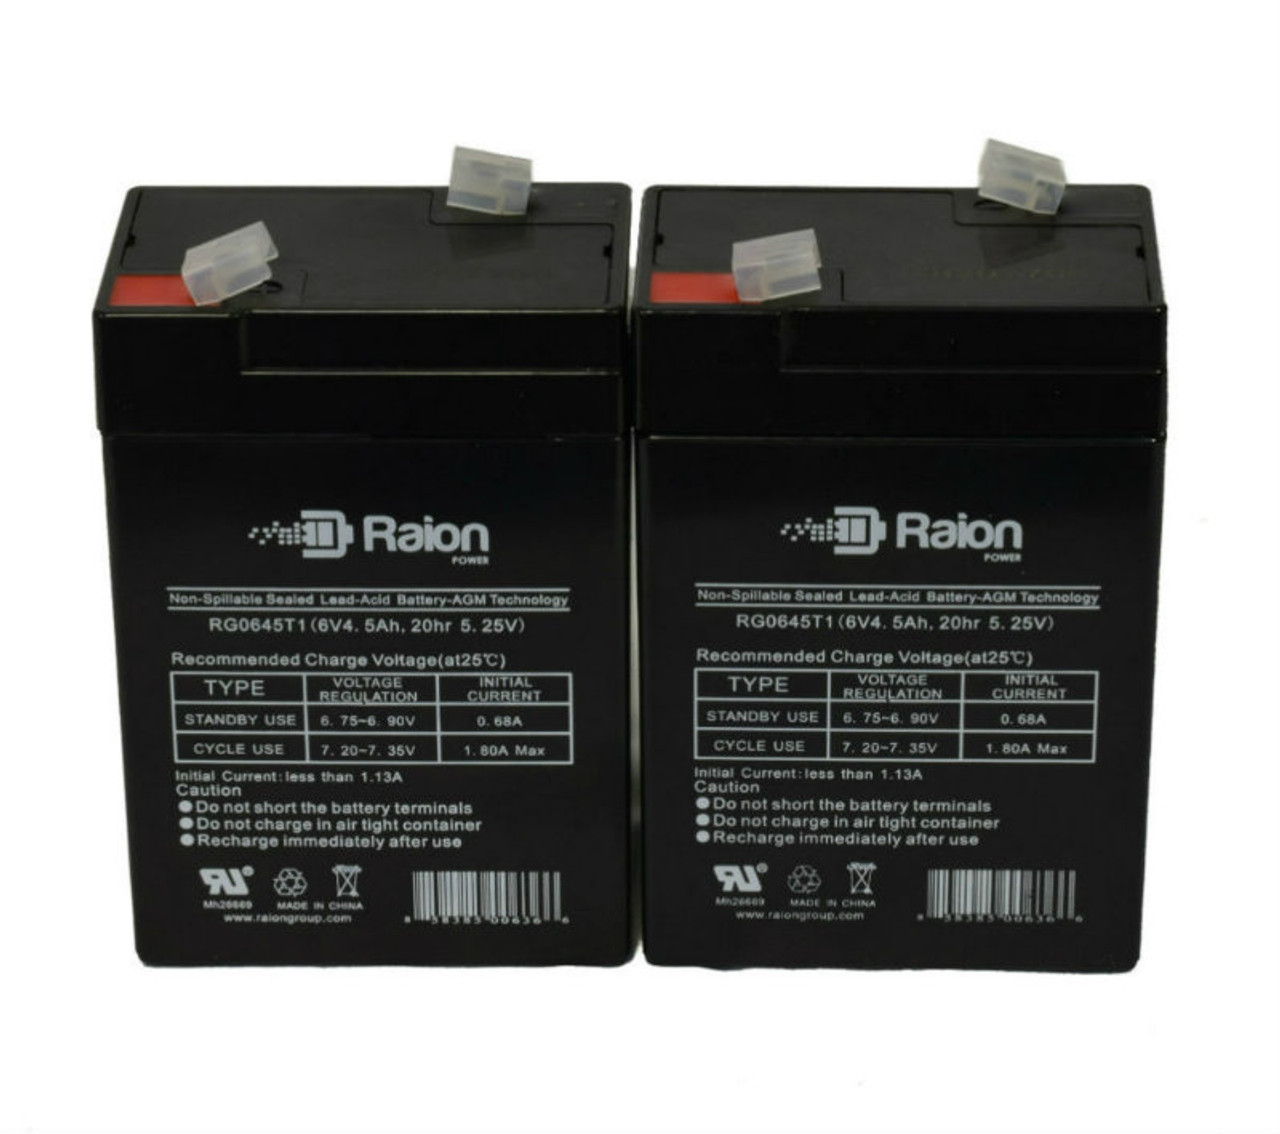 Raion Power 6 Volt 4.5Ah RG0645T1 Replacement Battery for Yucel Y4-6 - 2 Pack